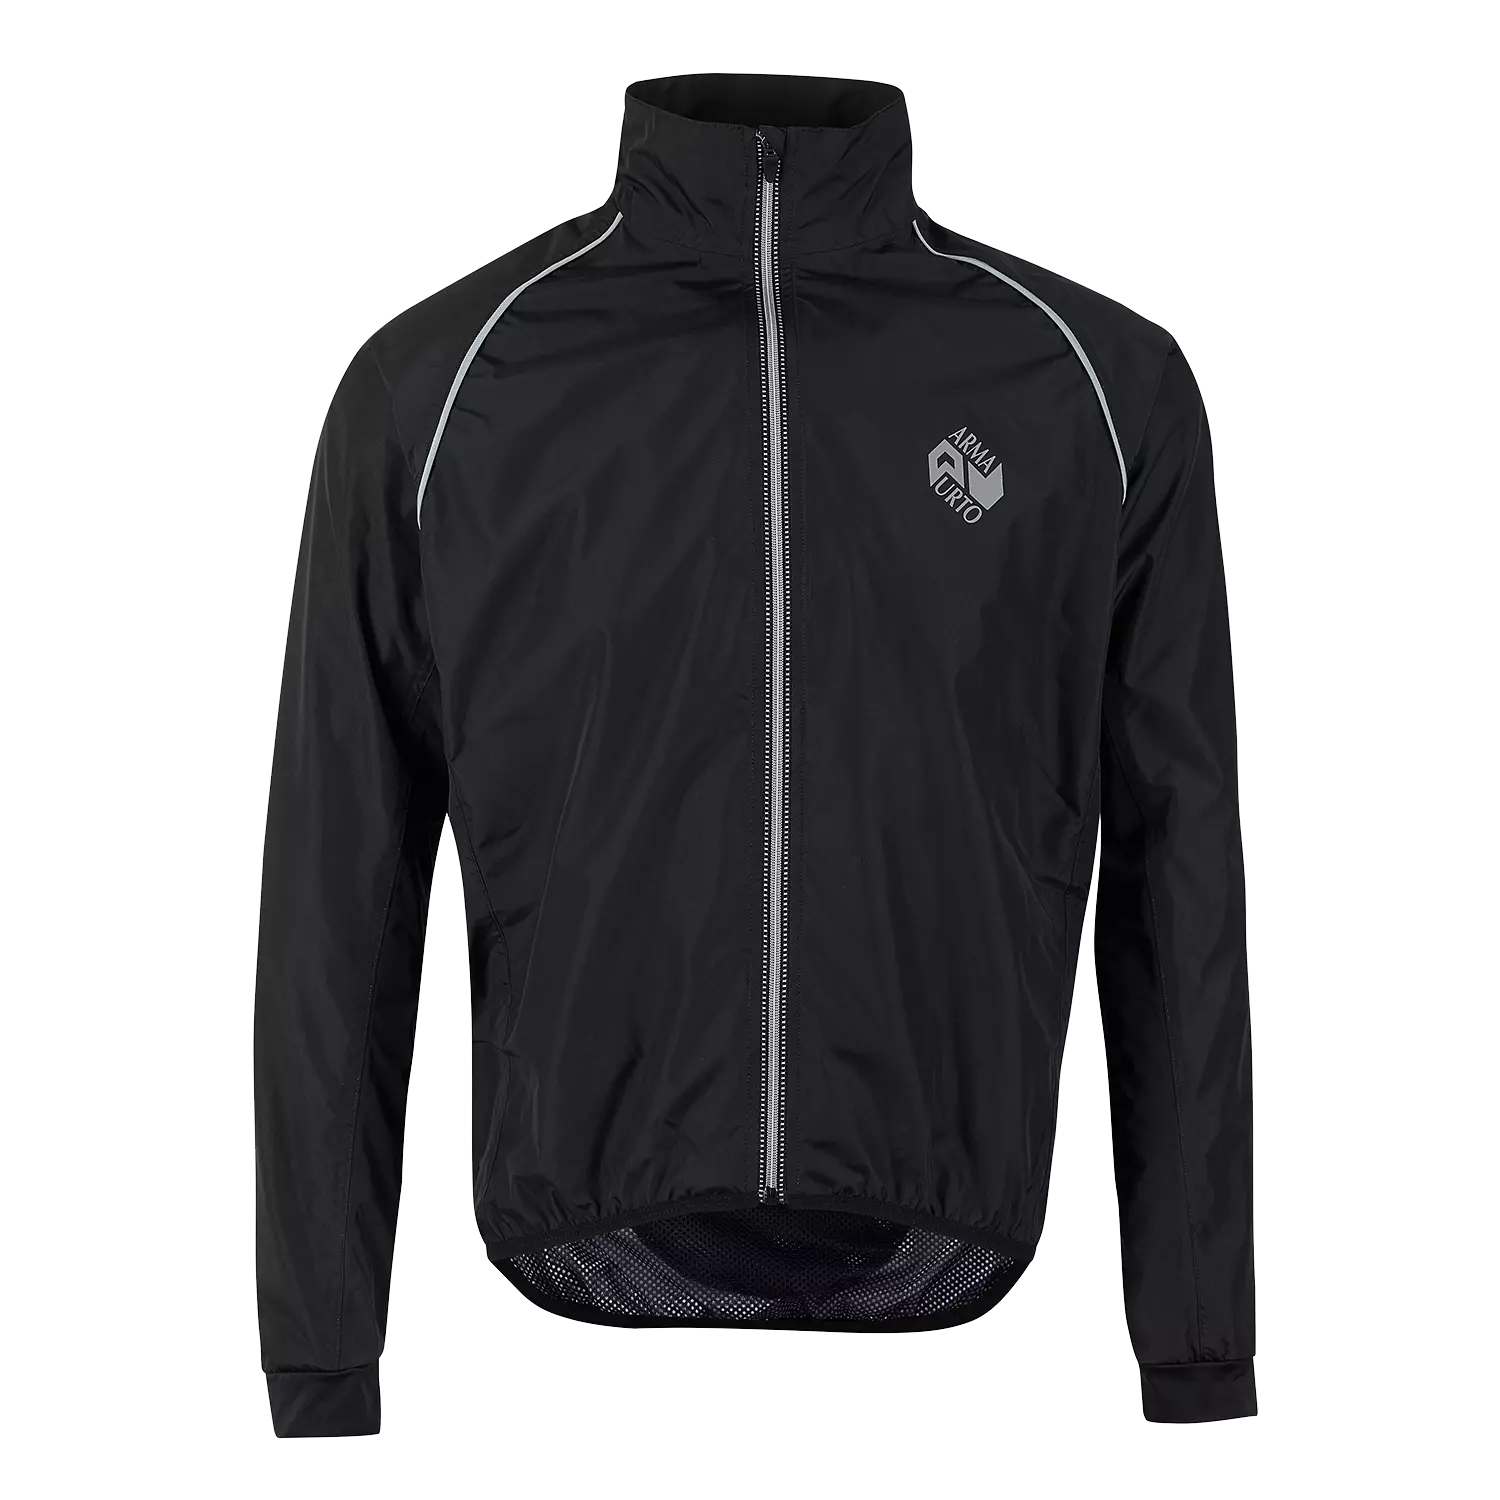 Pro-Flect Essential Cycling Jacket